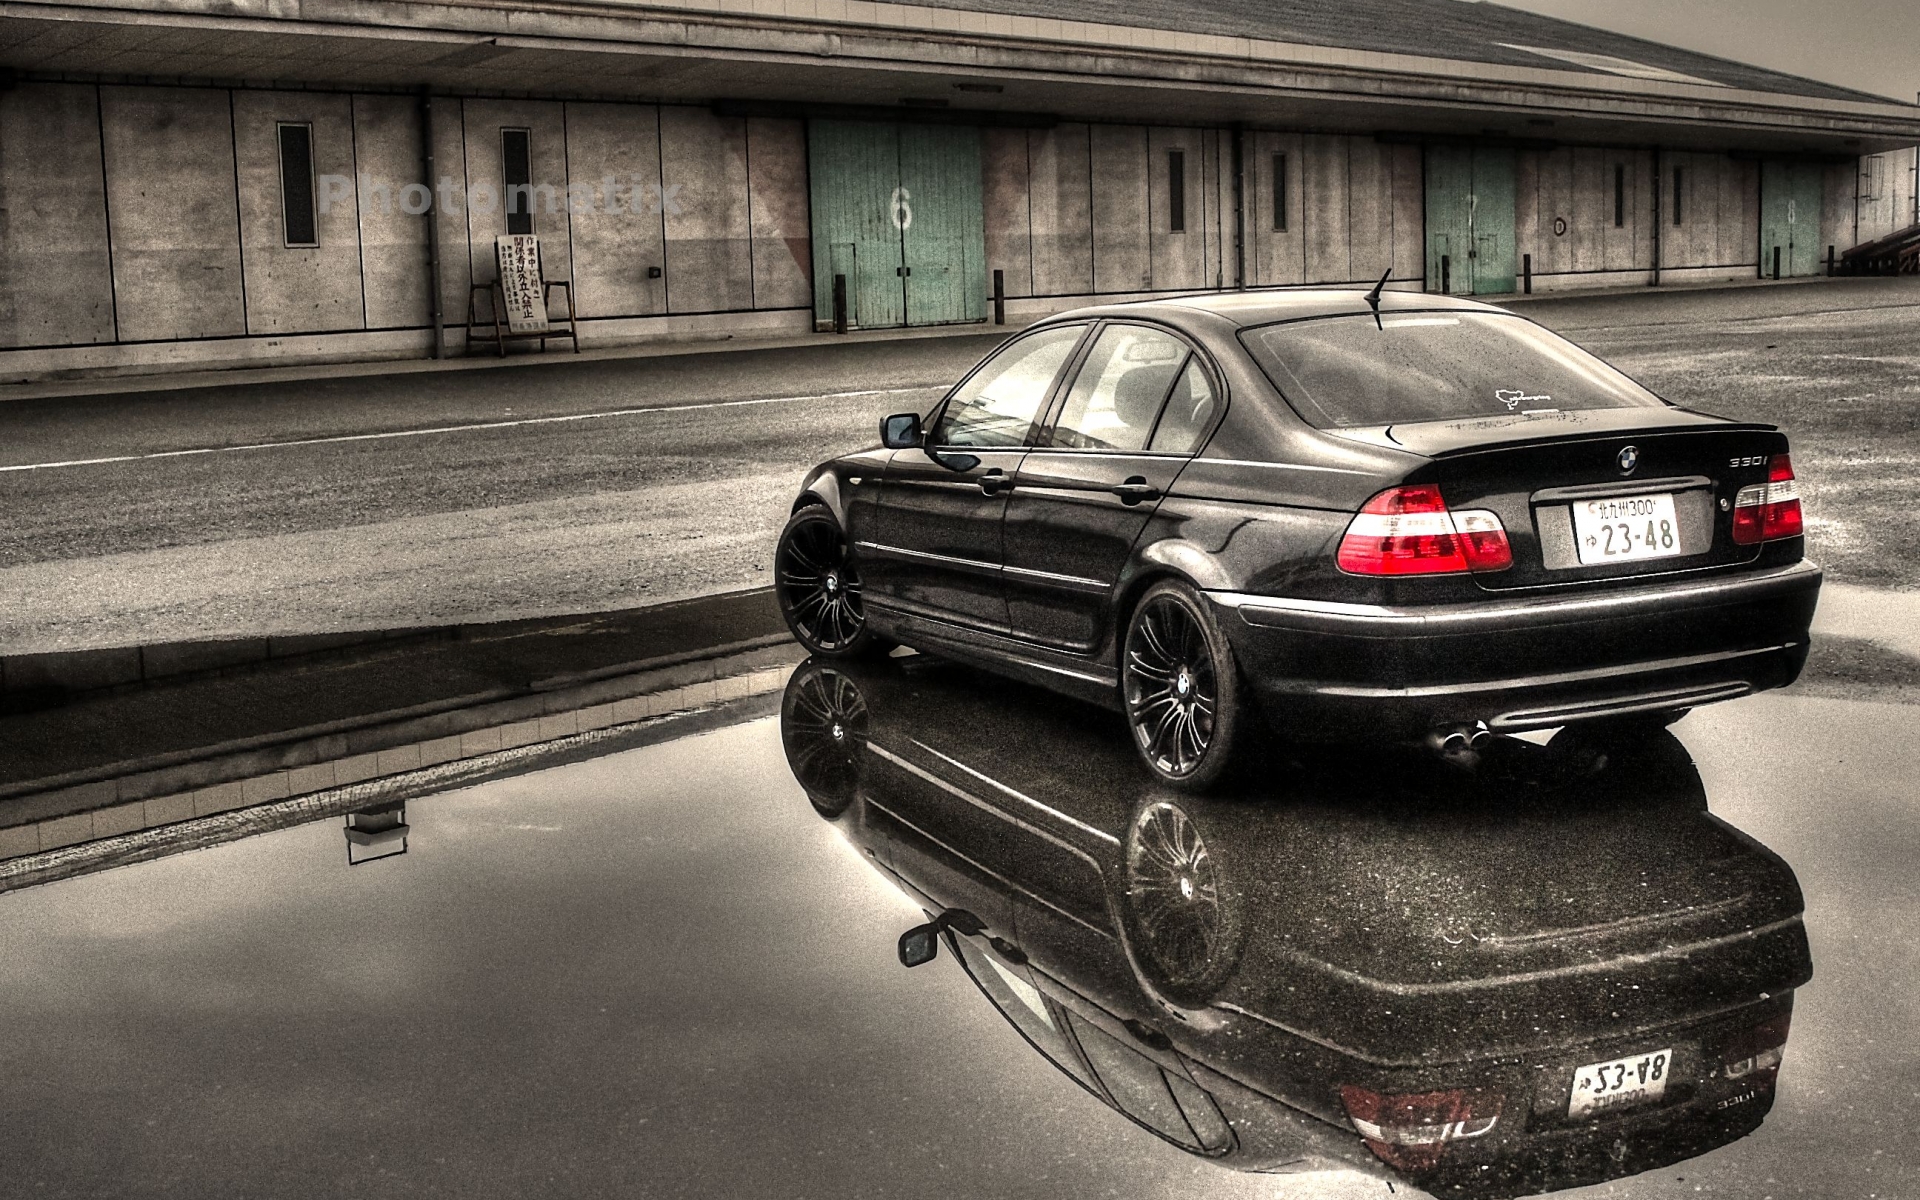 E46 Wallpaper Background For Pc FHDq Awesome